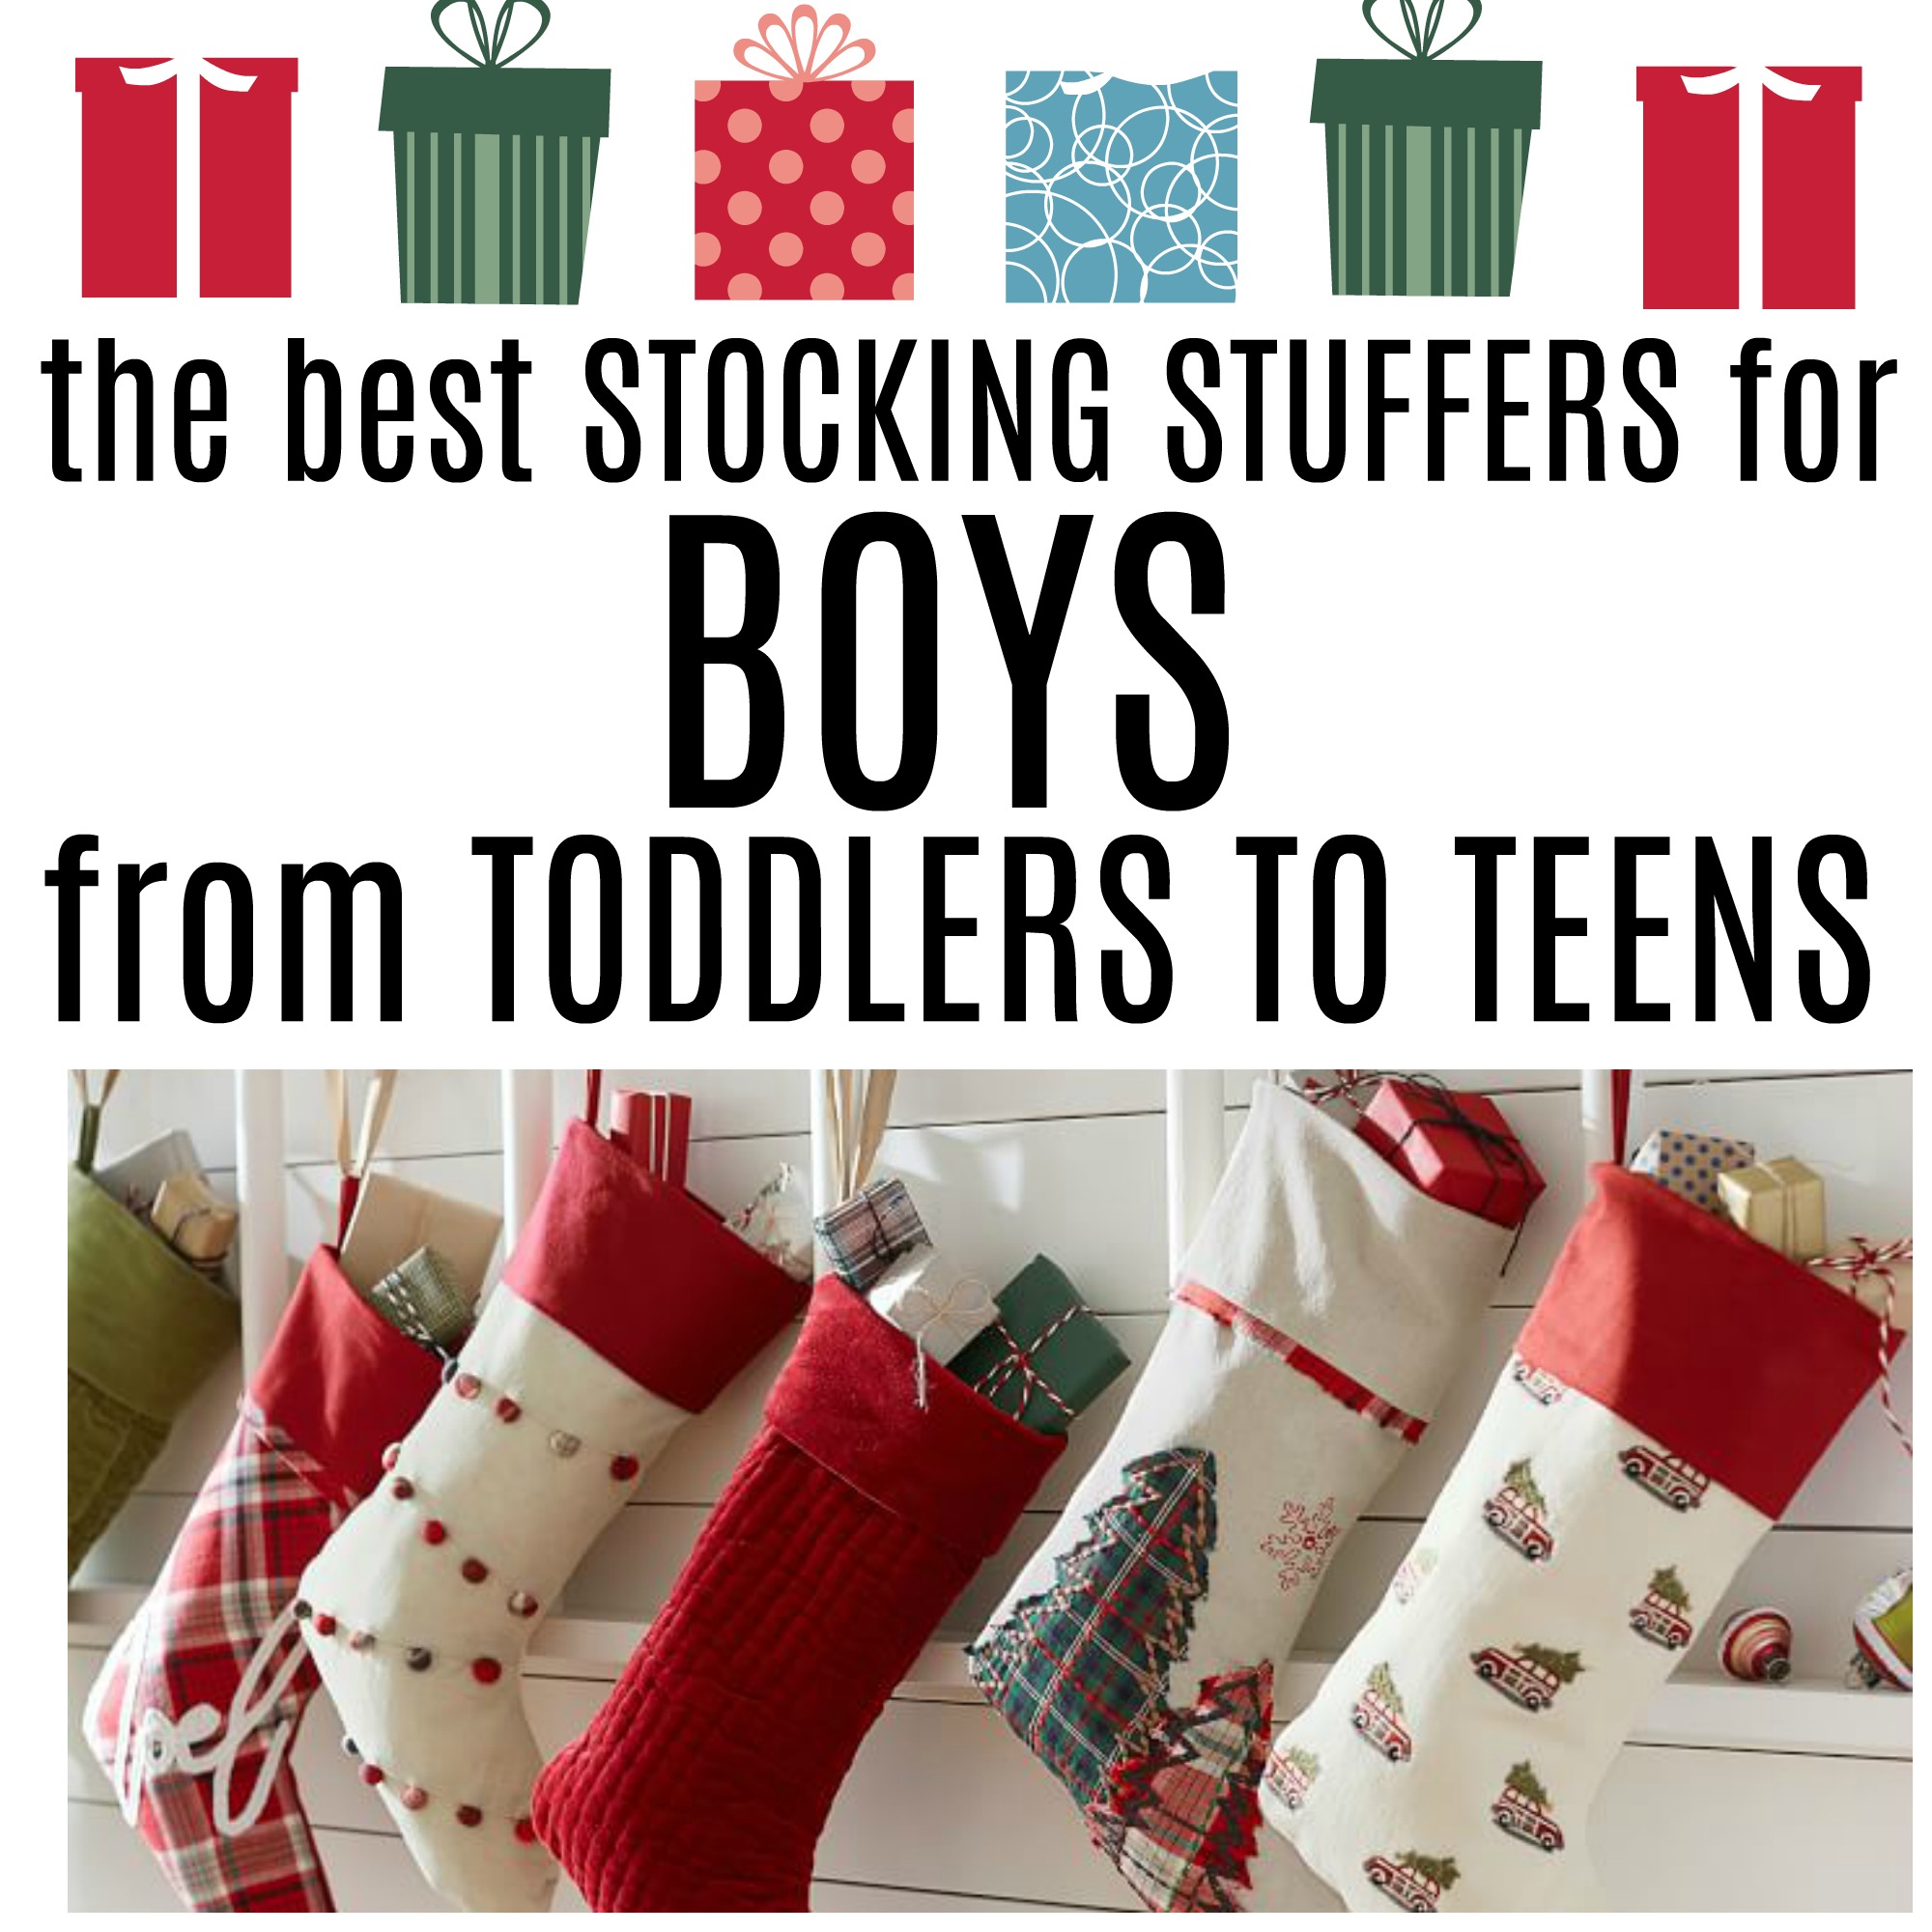 Christmas stocking ideas for teenagers